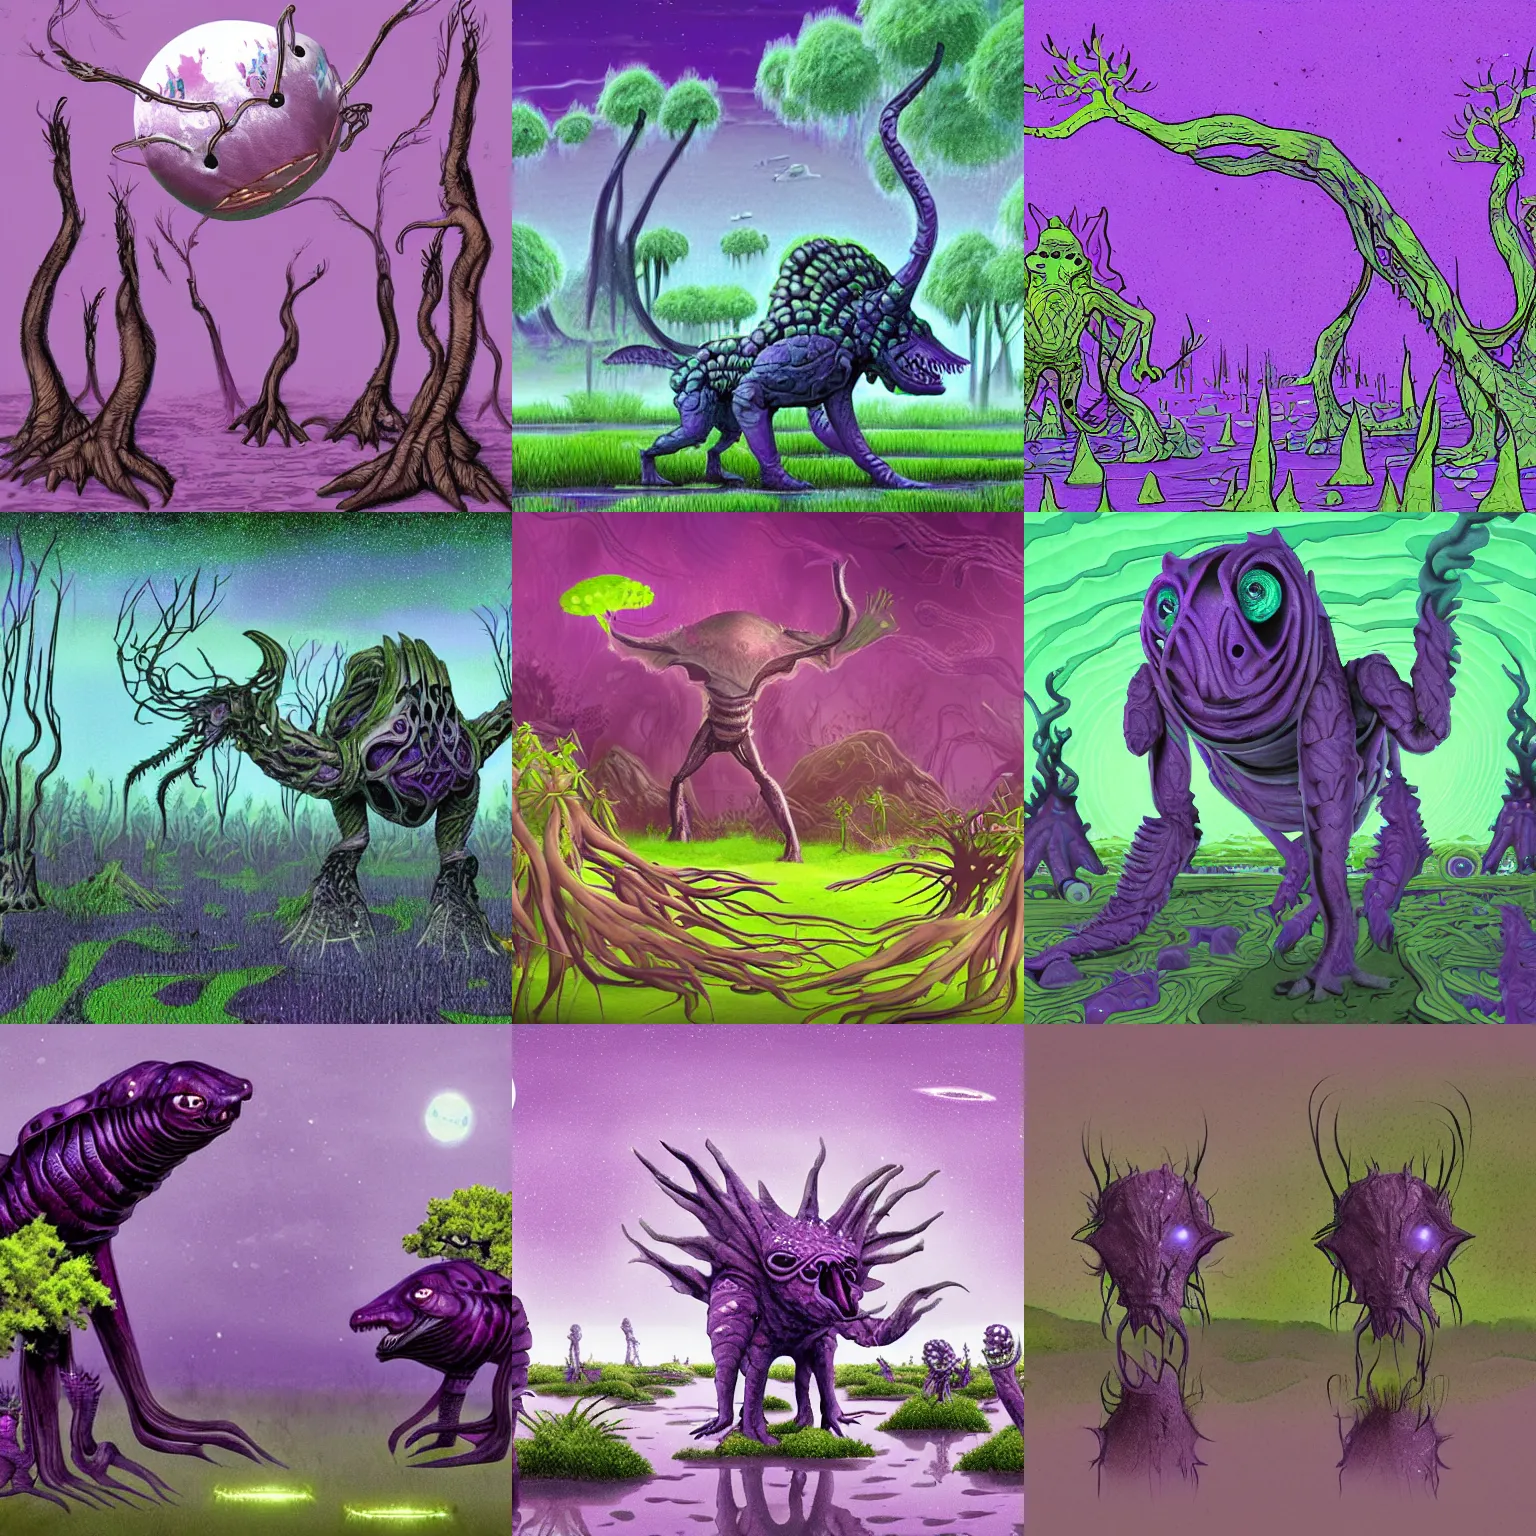 Prompt: extraterrestrial creature animal like adapted to swamps made of fertile purple mud and bulbous trees biomes, speculative evolution exobiology astrobiology, sci - fi illustration